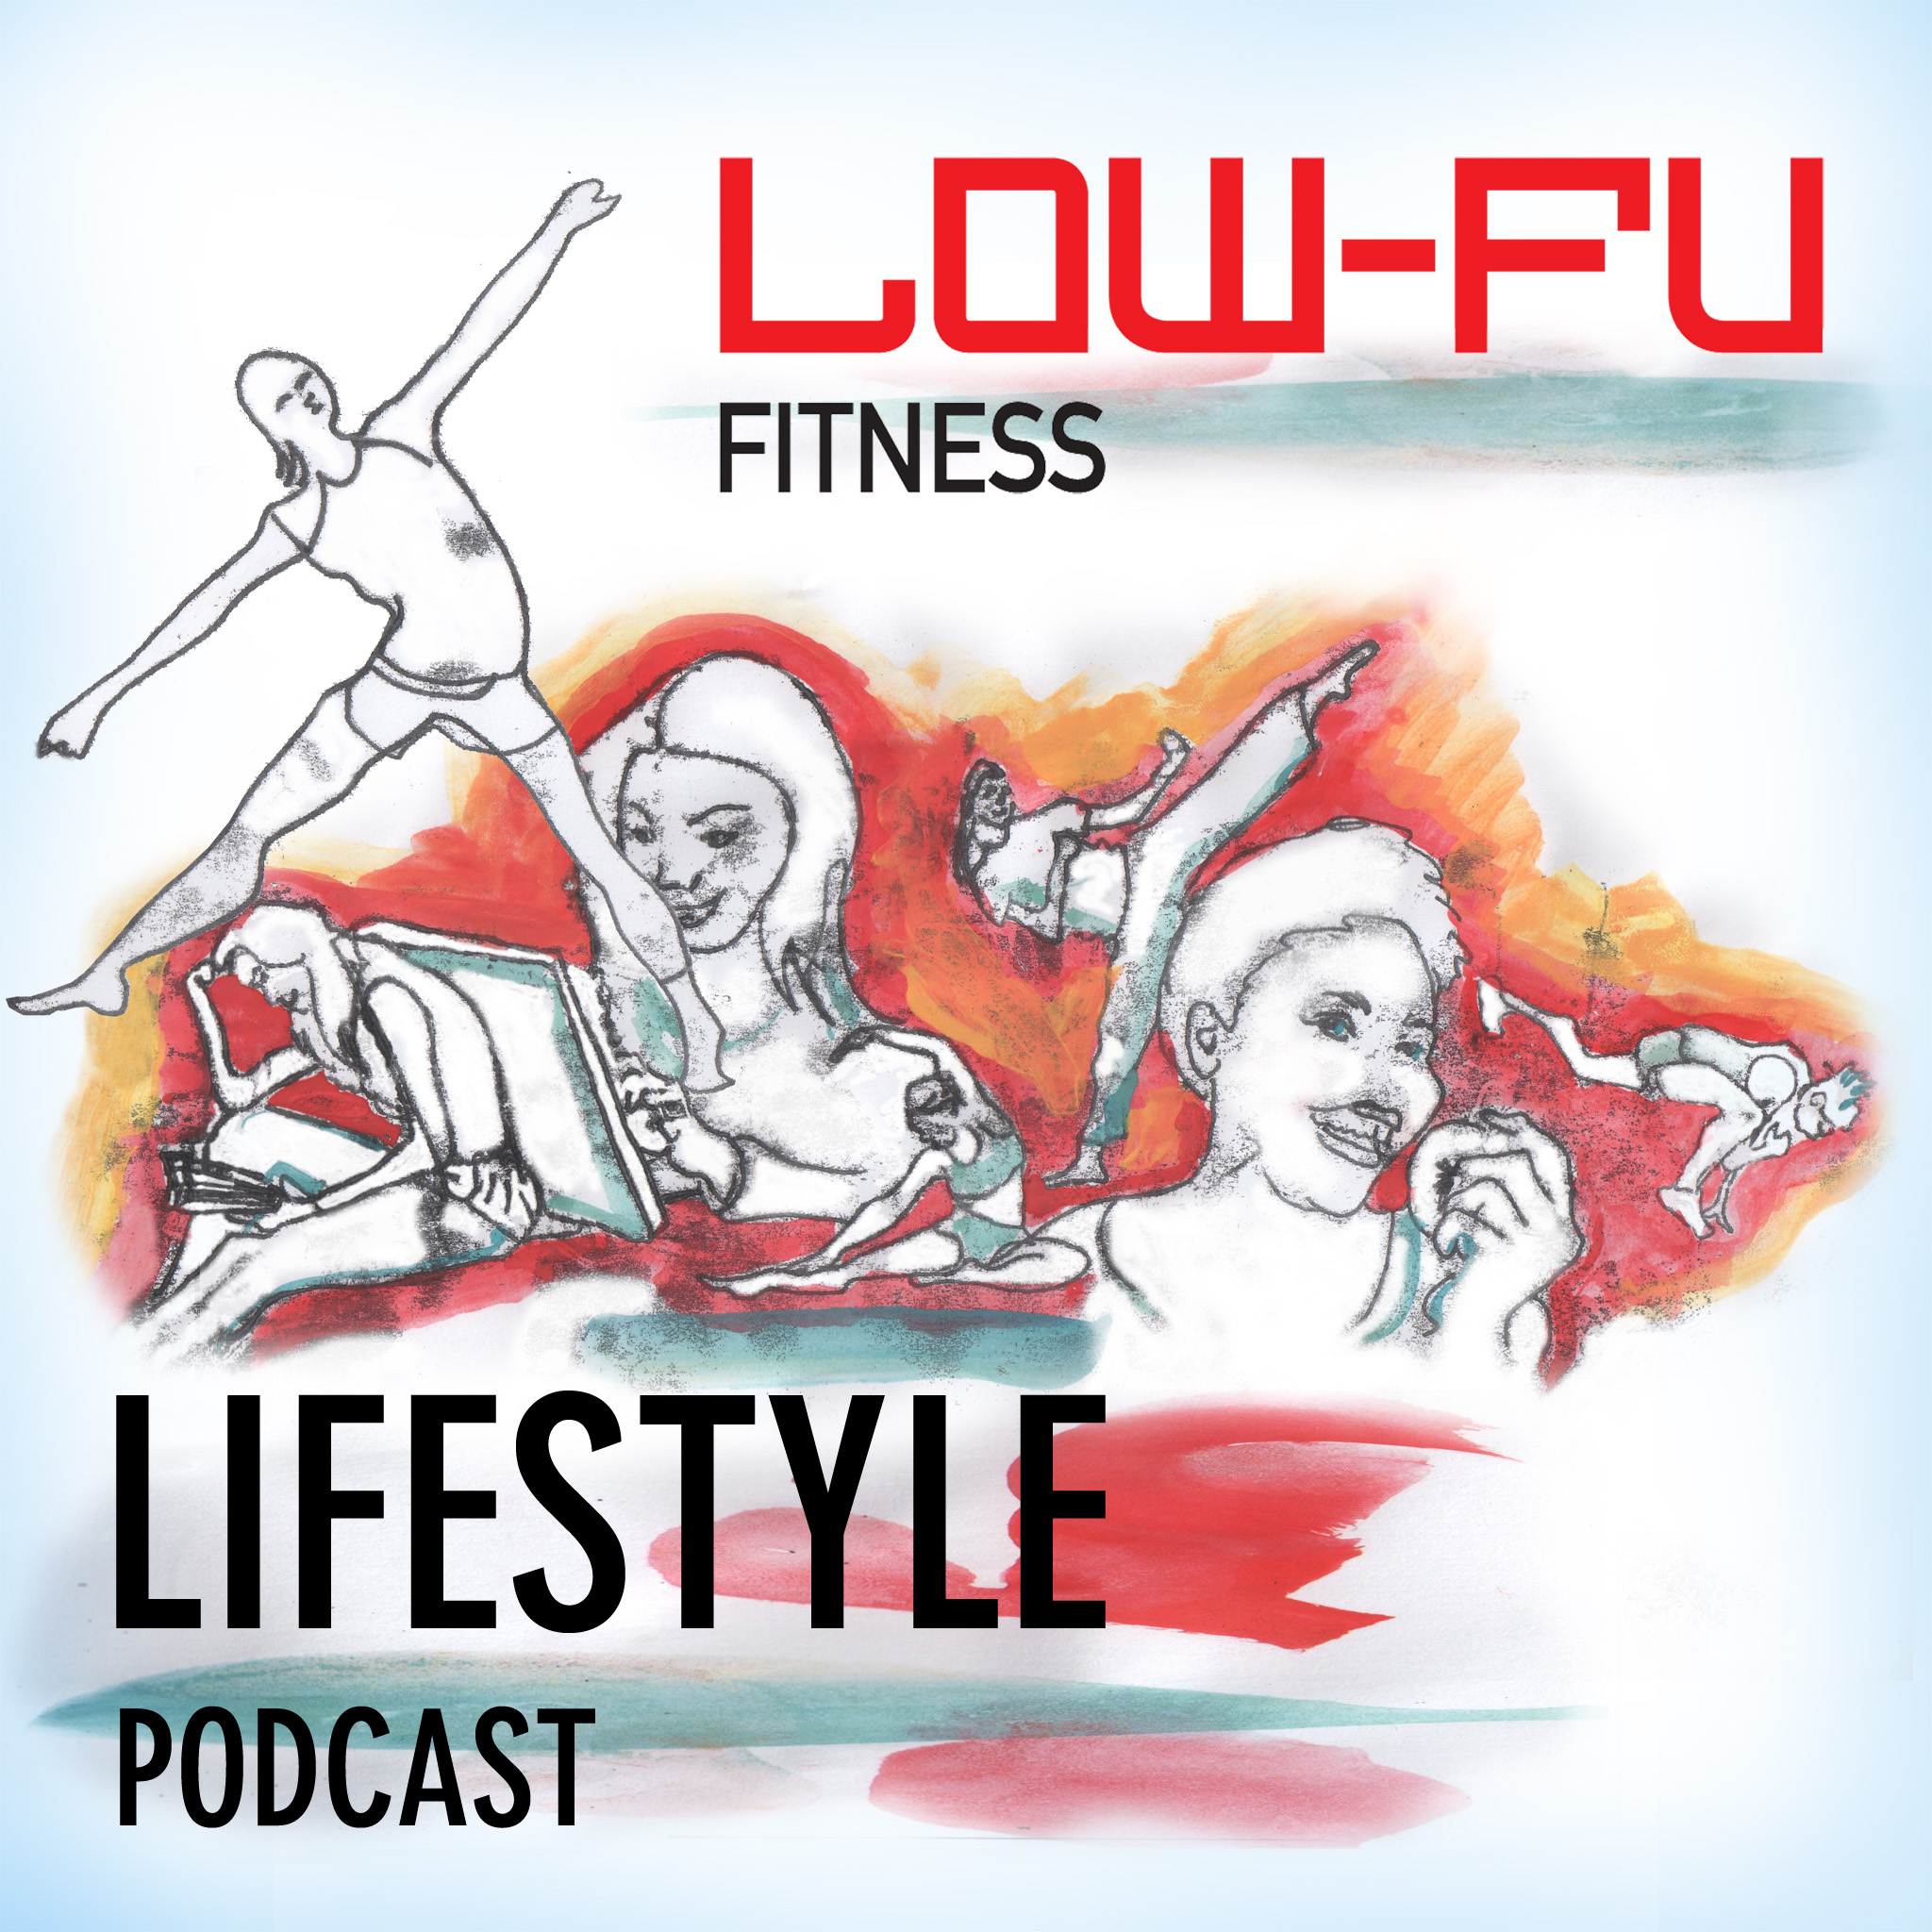 Episode 14: Growing Up With Fitness